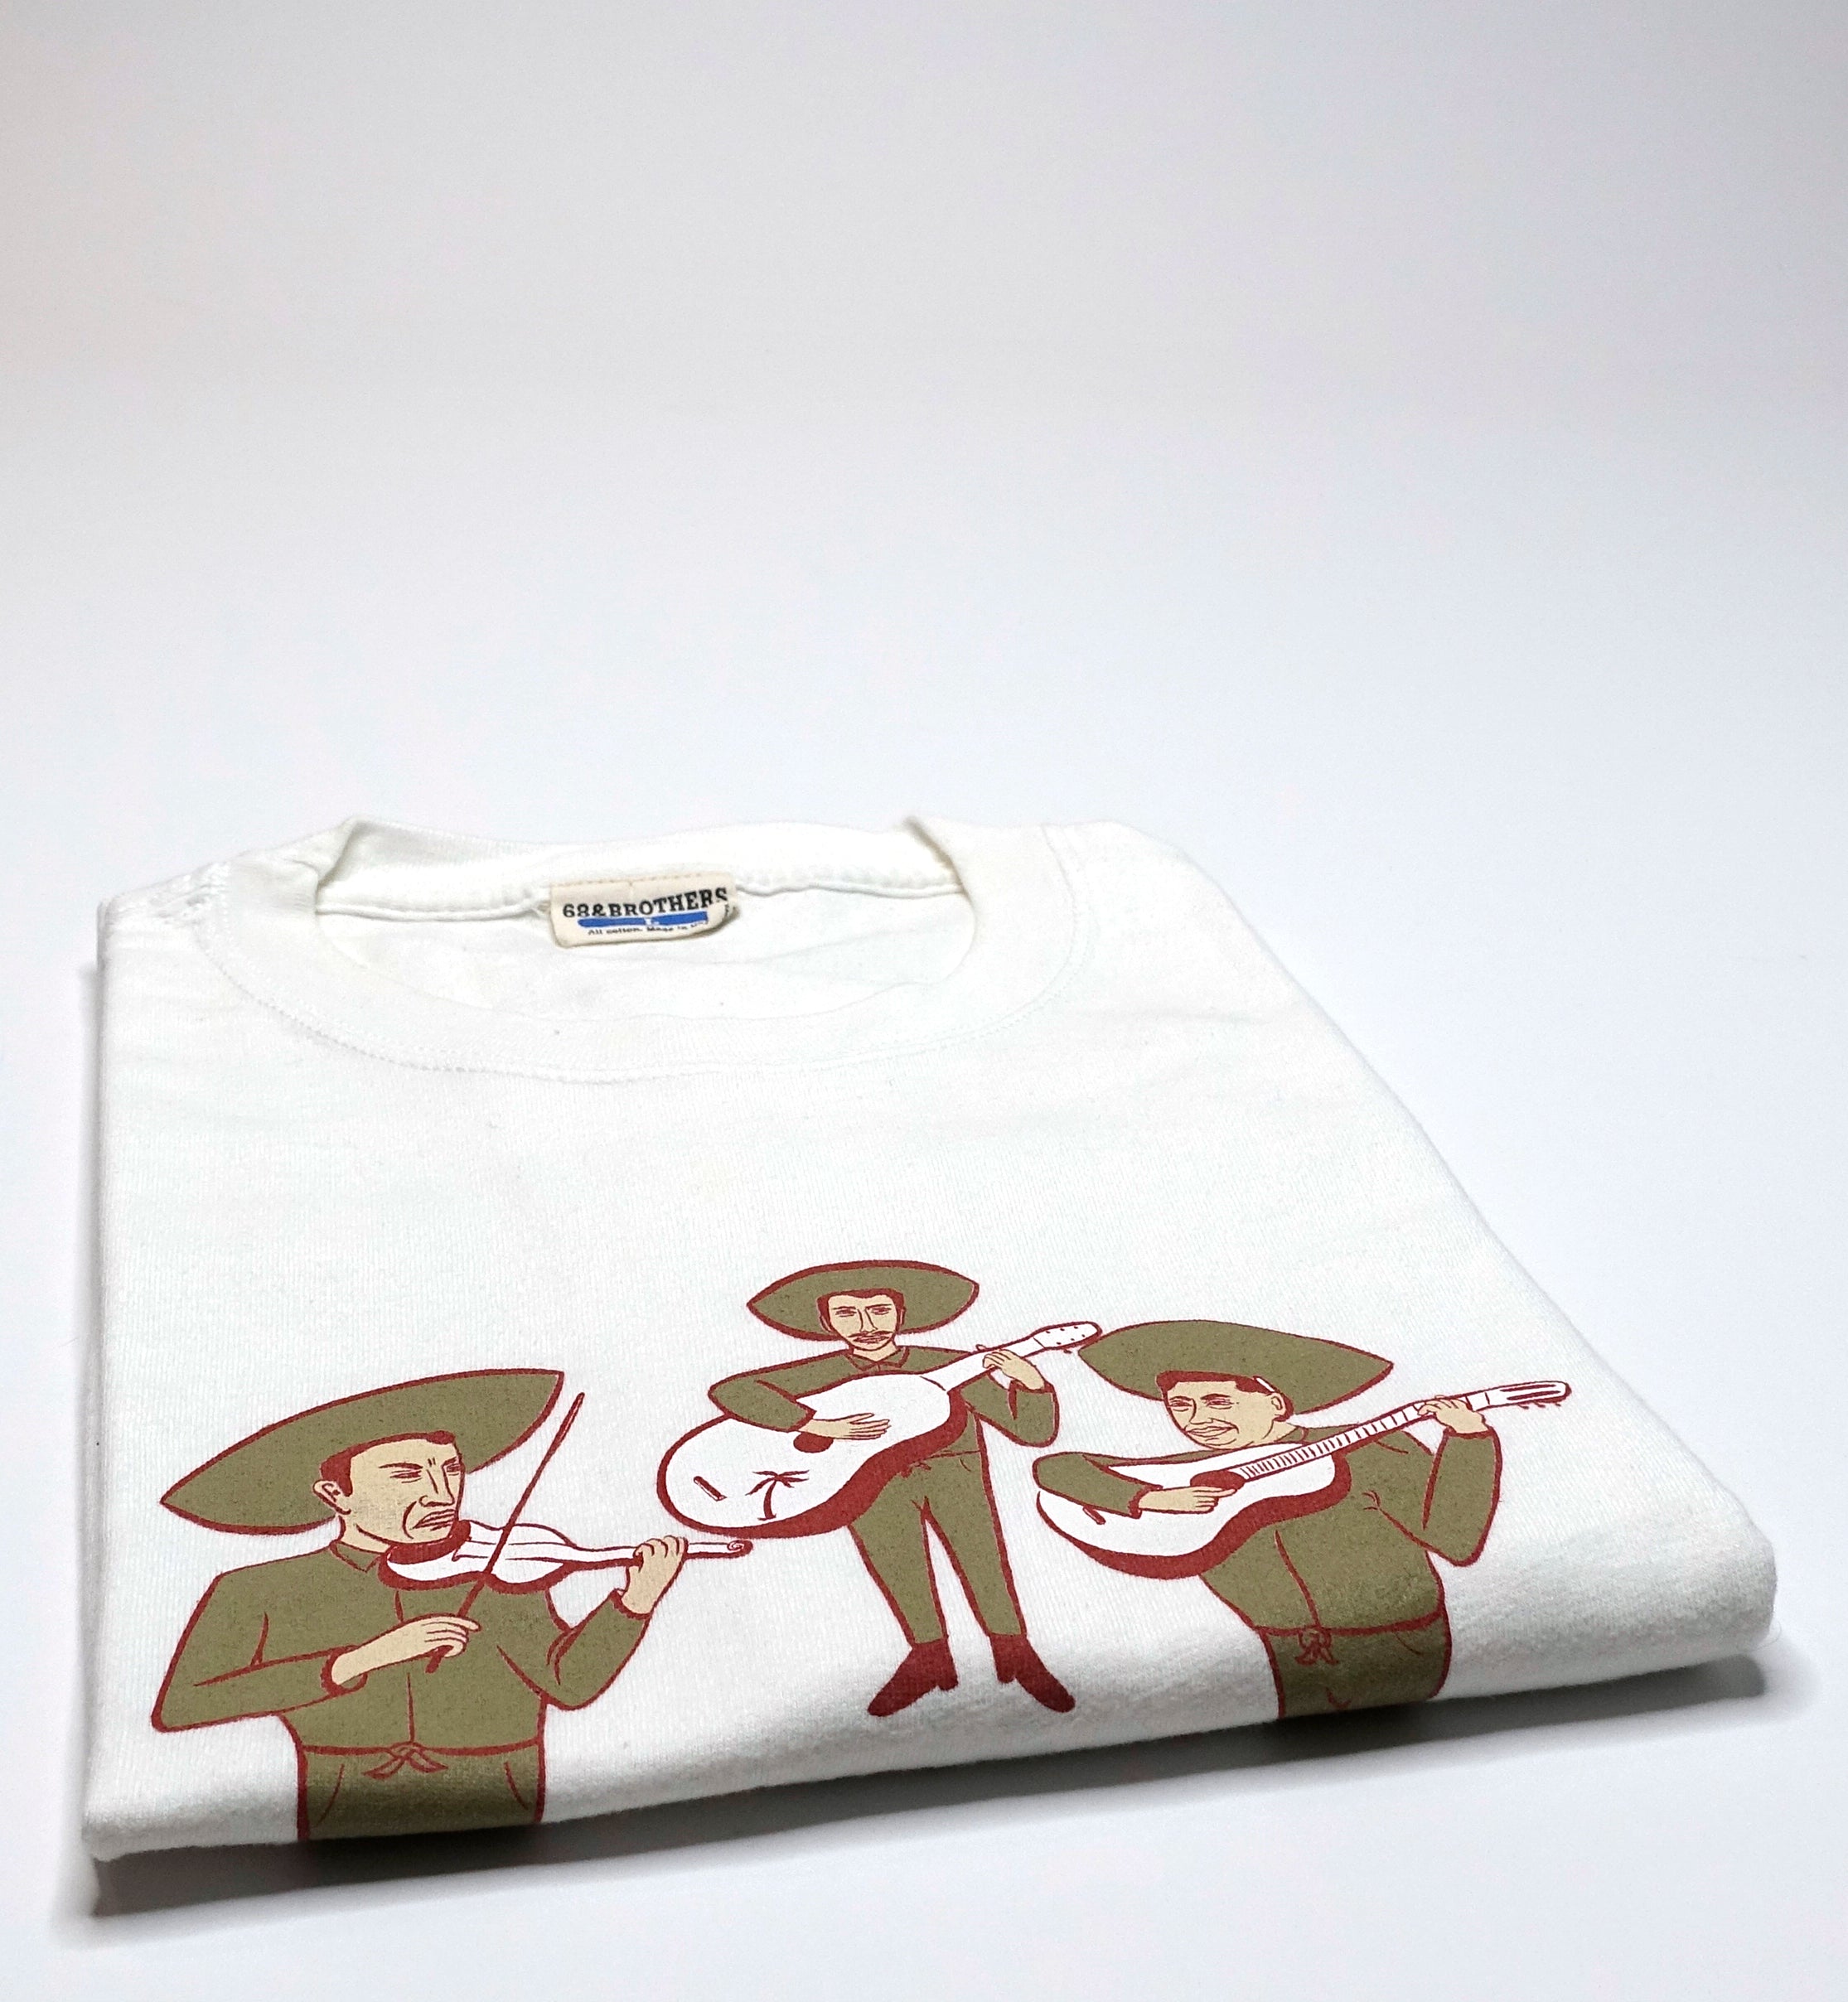 Tommy Guerrero - A Little Bit Of Somethin' (Mariachi) Japan 2000 Tour Shirt (Barry McGee Art) Size Large